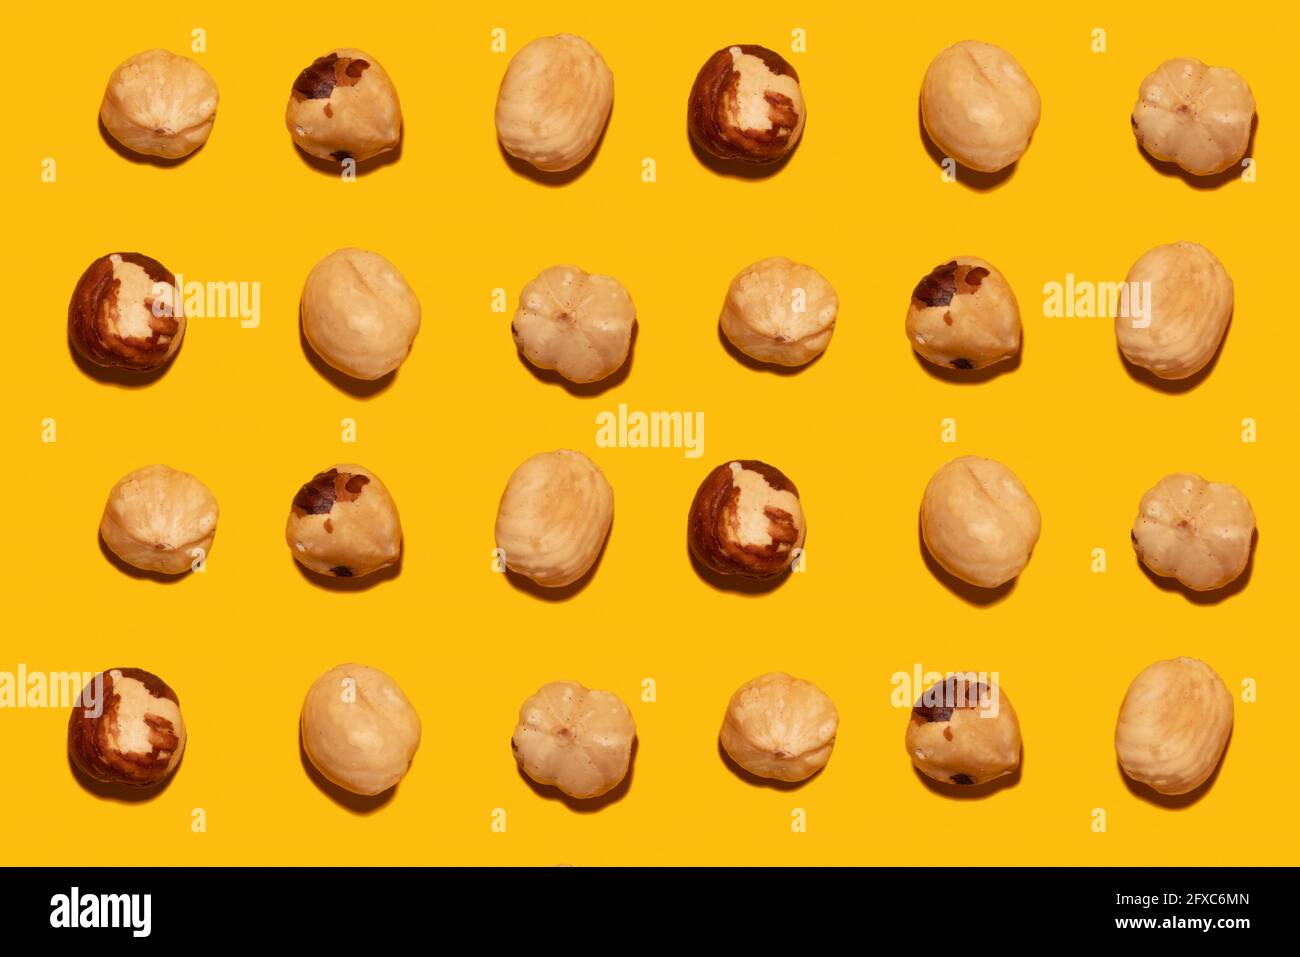 Imperfect organic roasted hazelnuts in rows against yellow background Stock Photo